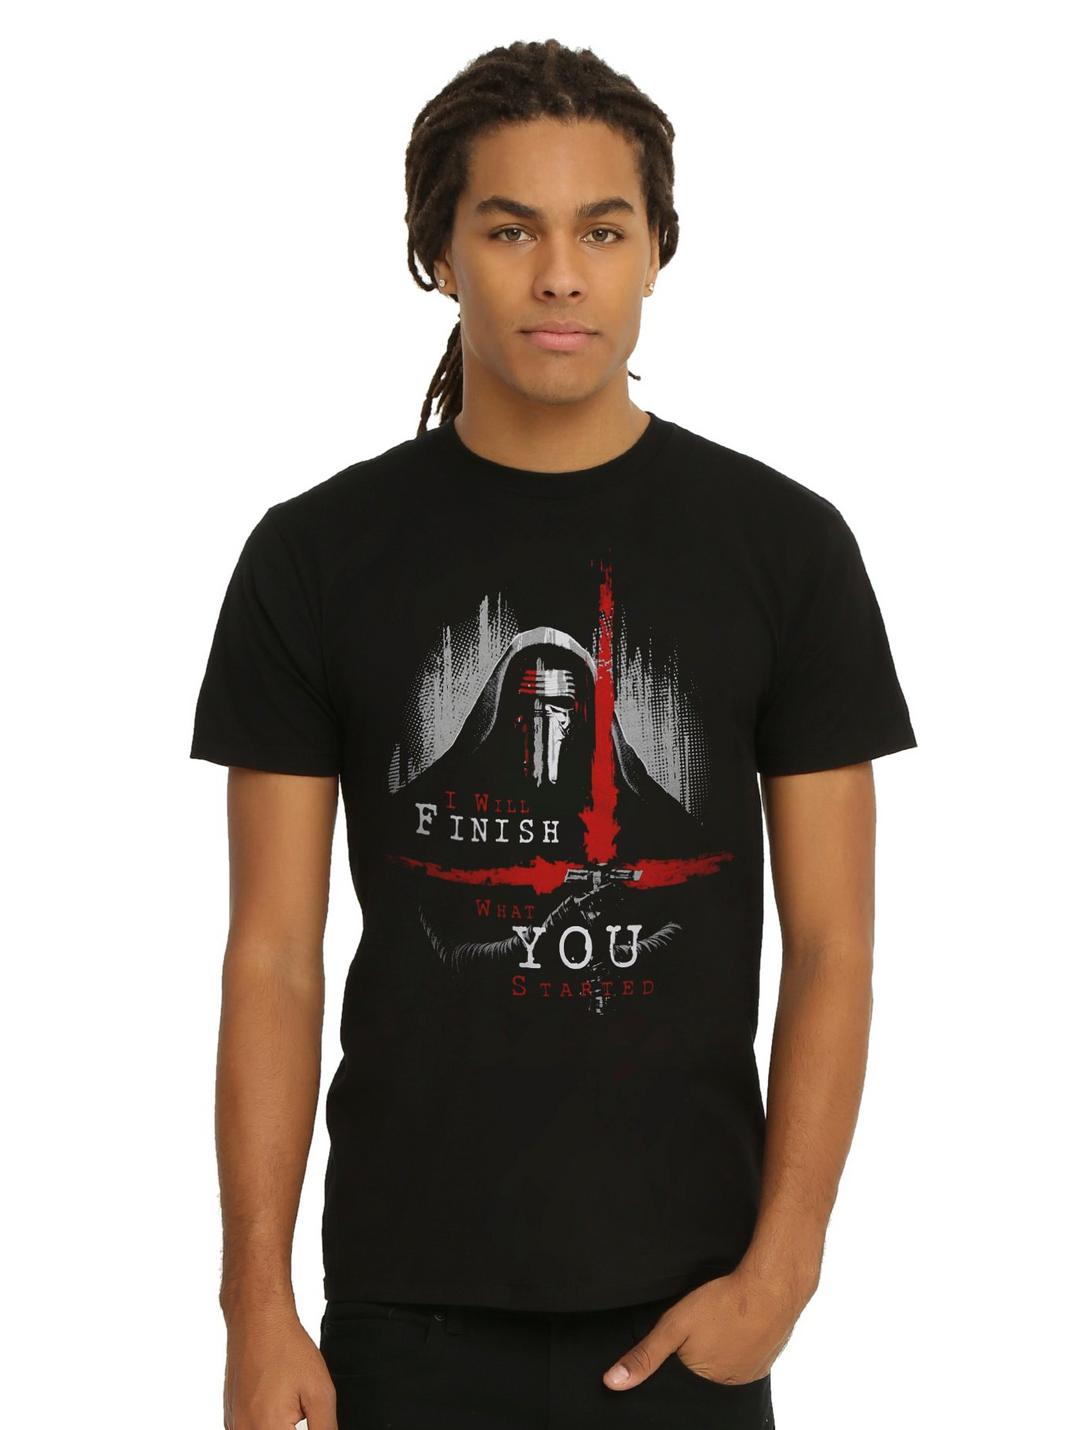 Star Wars: The Force Awakens Kylo Ren Finish What You Started T-Shirt, BLACK, hi-res